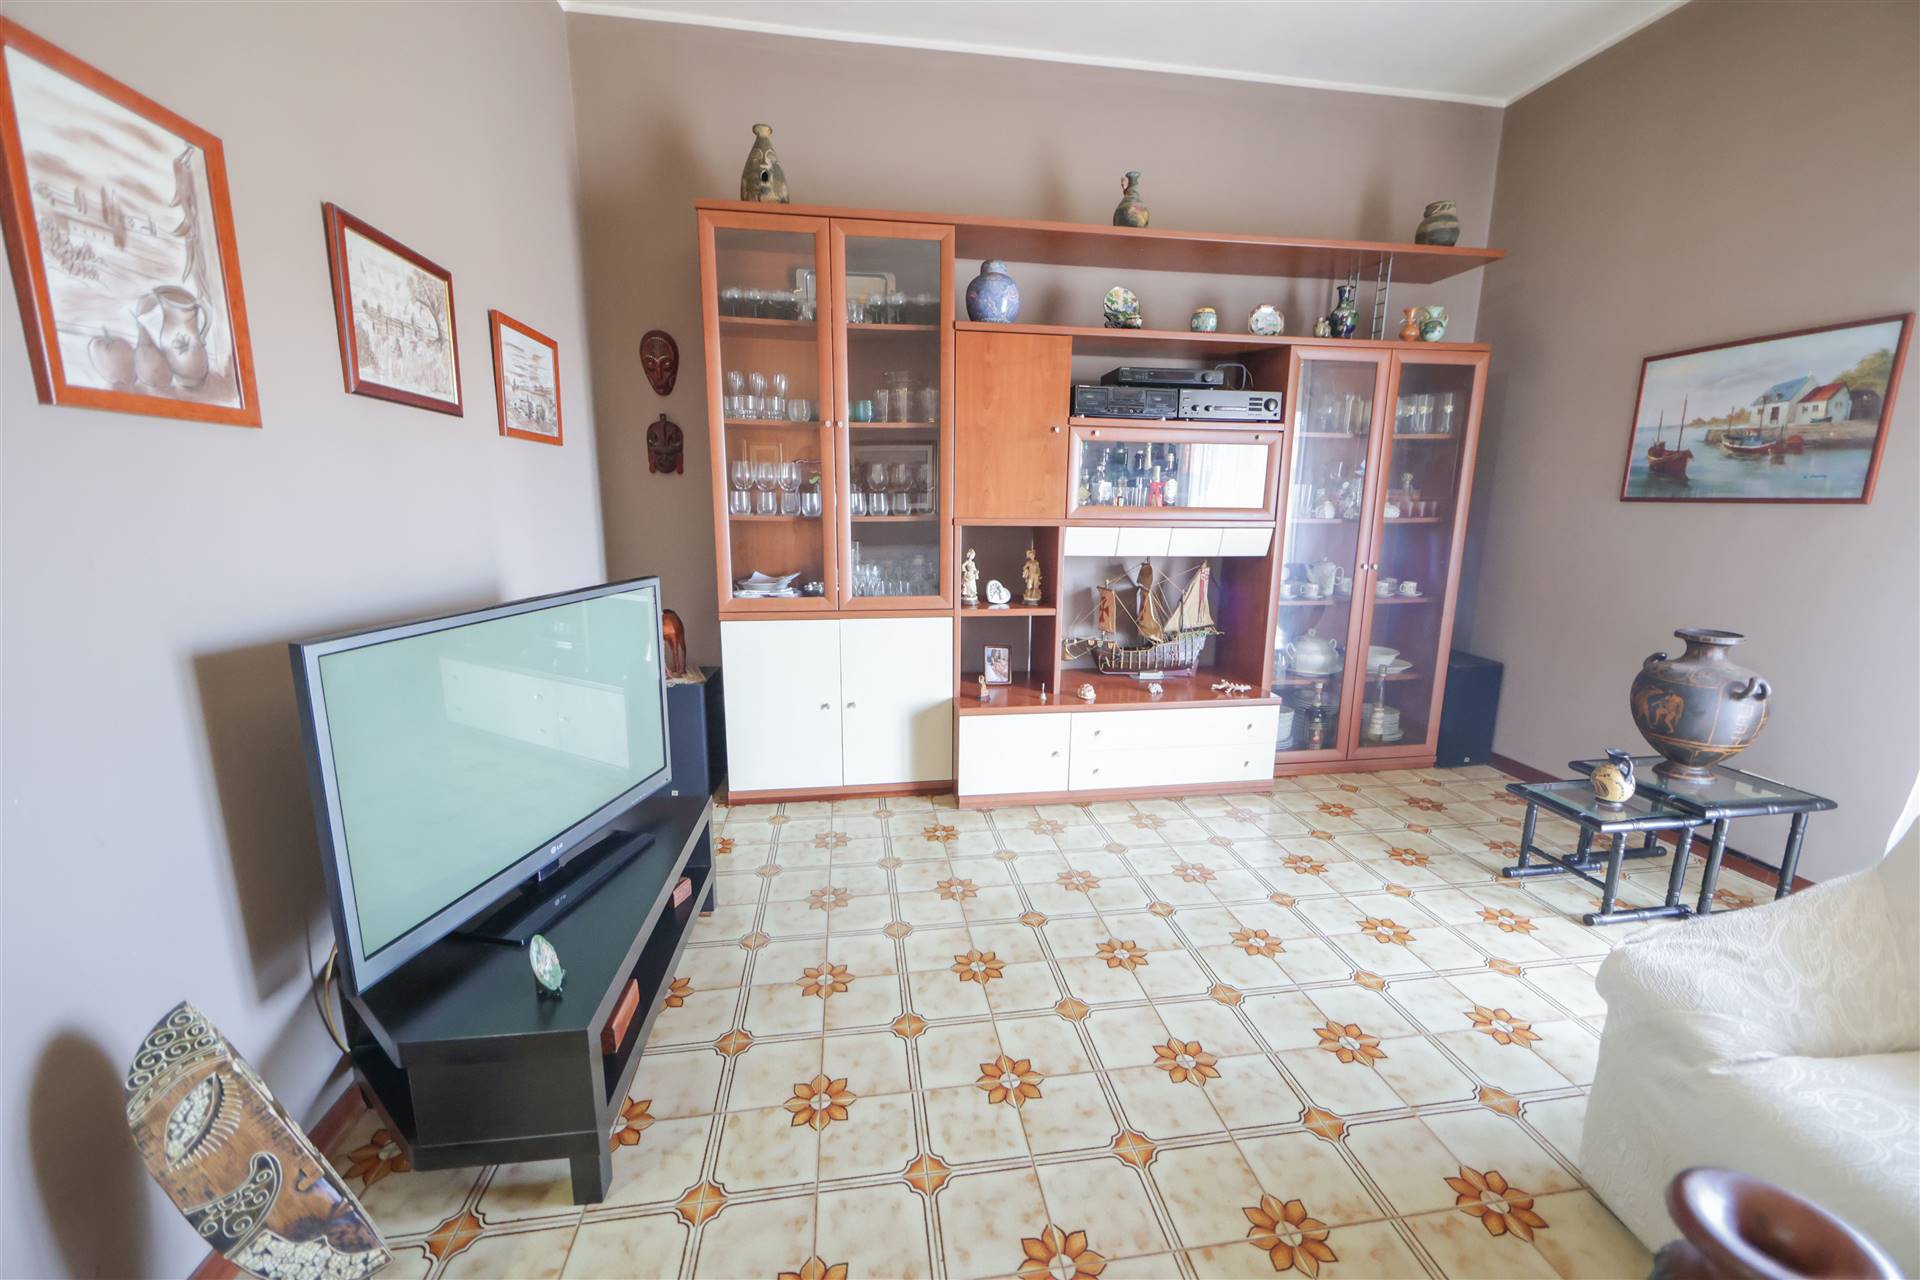 ACI SAN FILIPPO, ACI CATENA, Apartment for sale of 110 Sq. mt., Restored, Heating Individual heating system, Energetic class: G, Epi: 1 kwh/m2 year, placed at 1°, composed by: 3 Rooms, Separate 